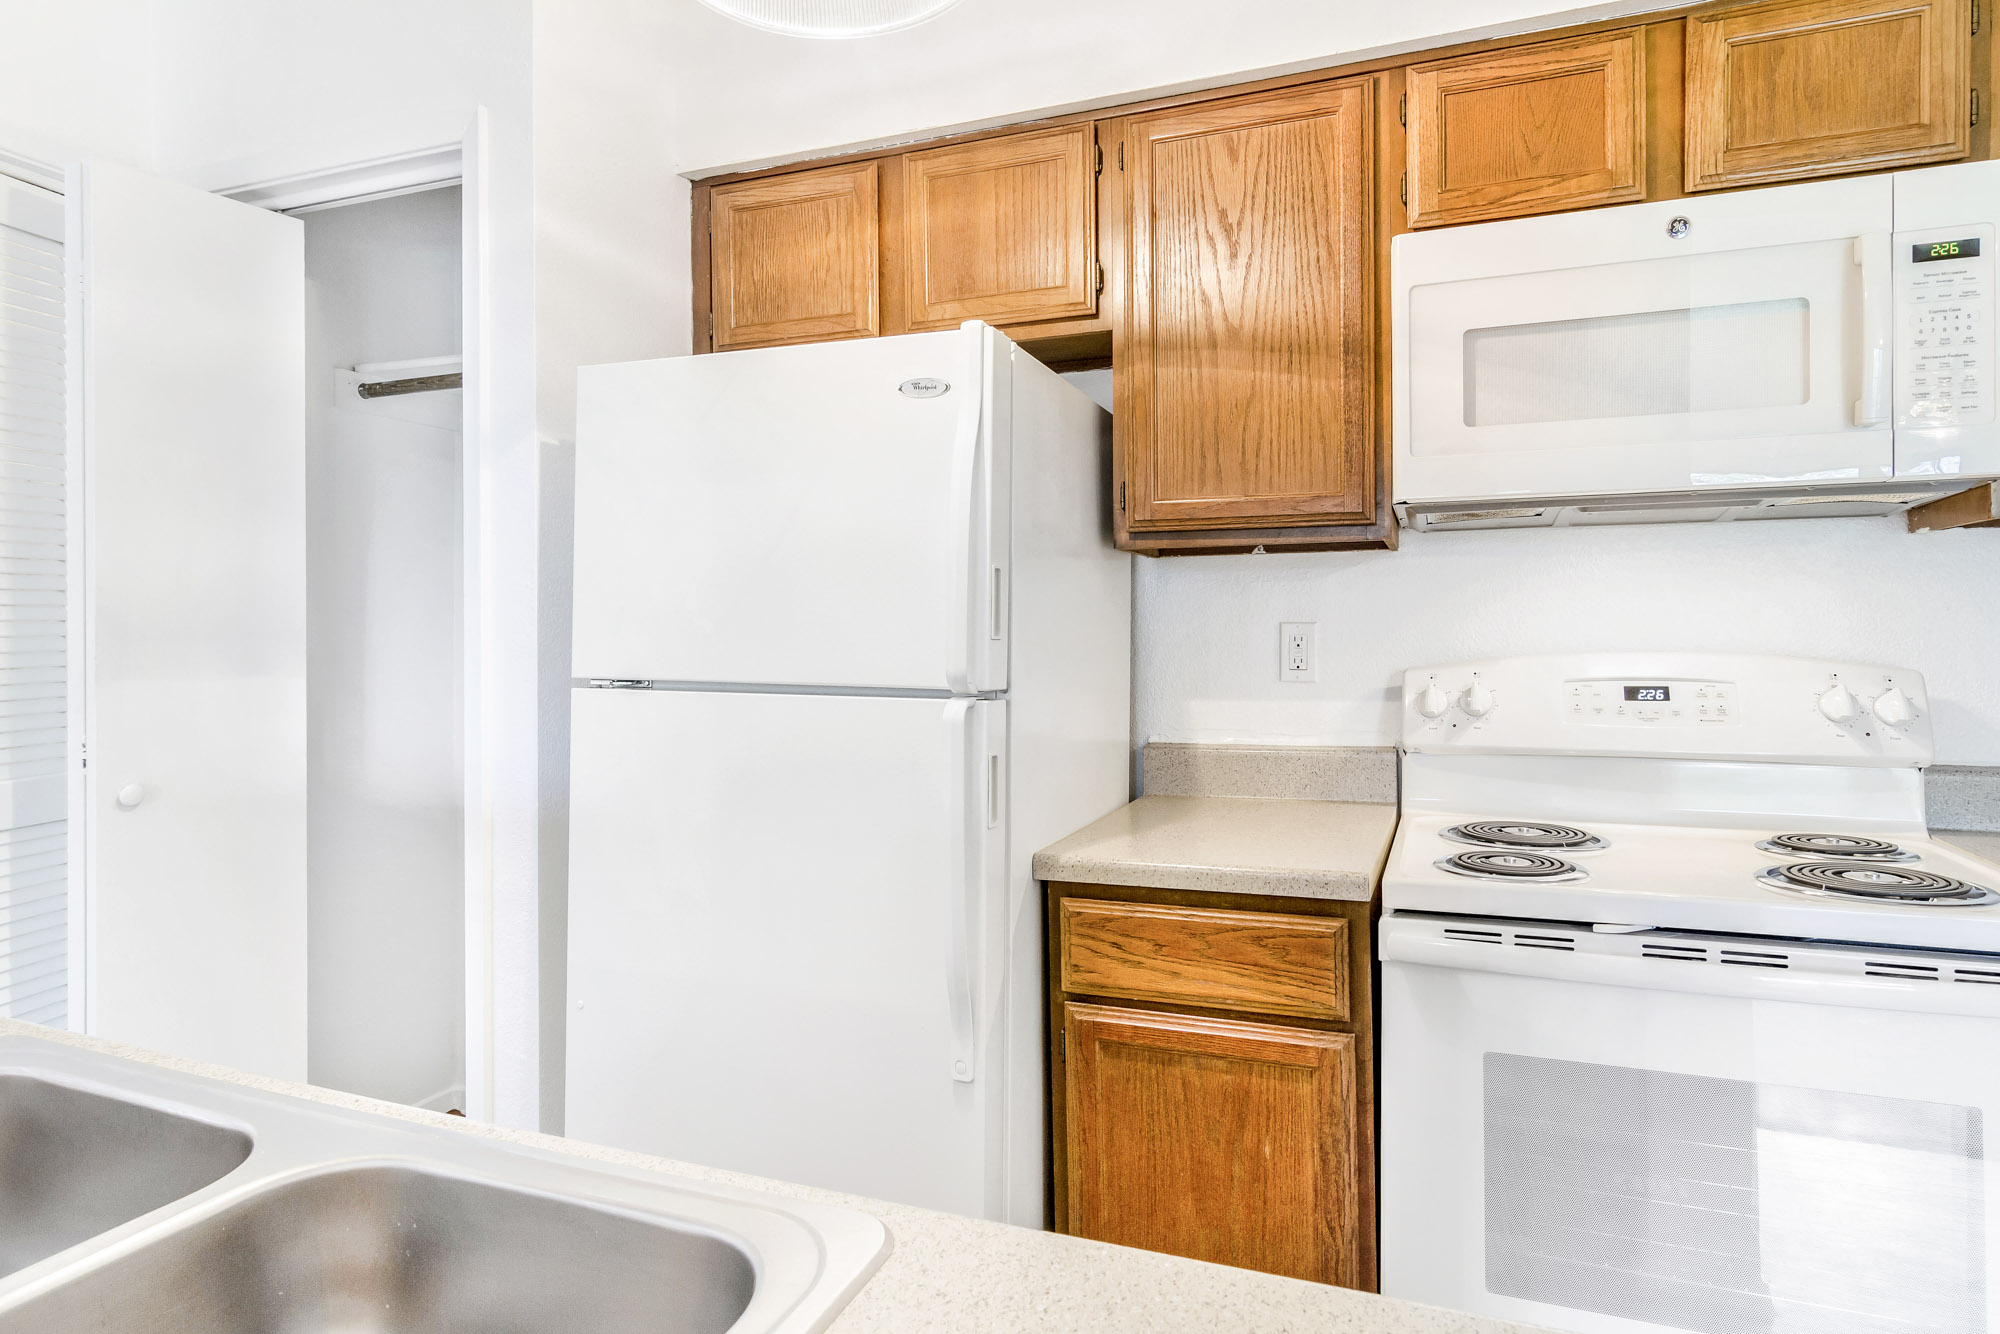 A kitchen at Canyon Chase apartments in Westminster, CO.